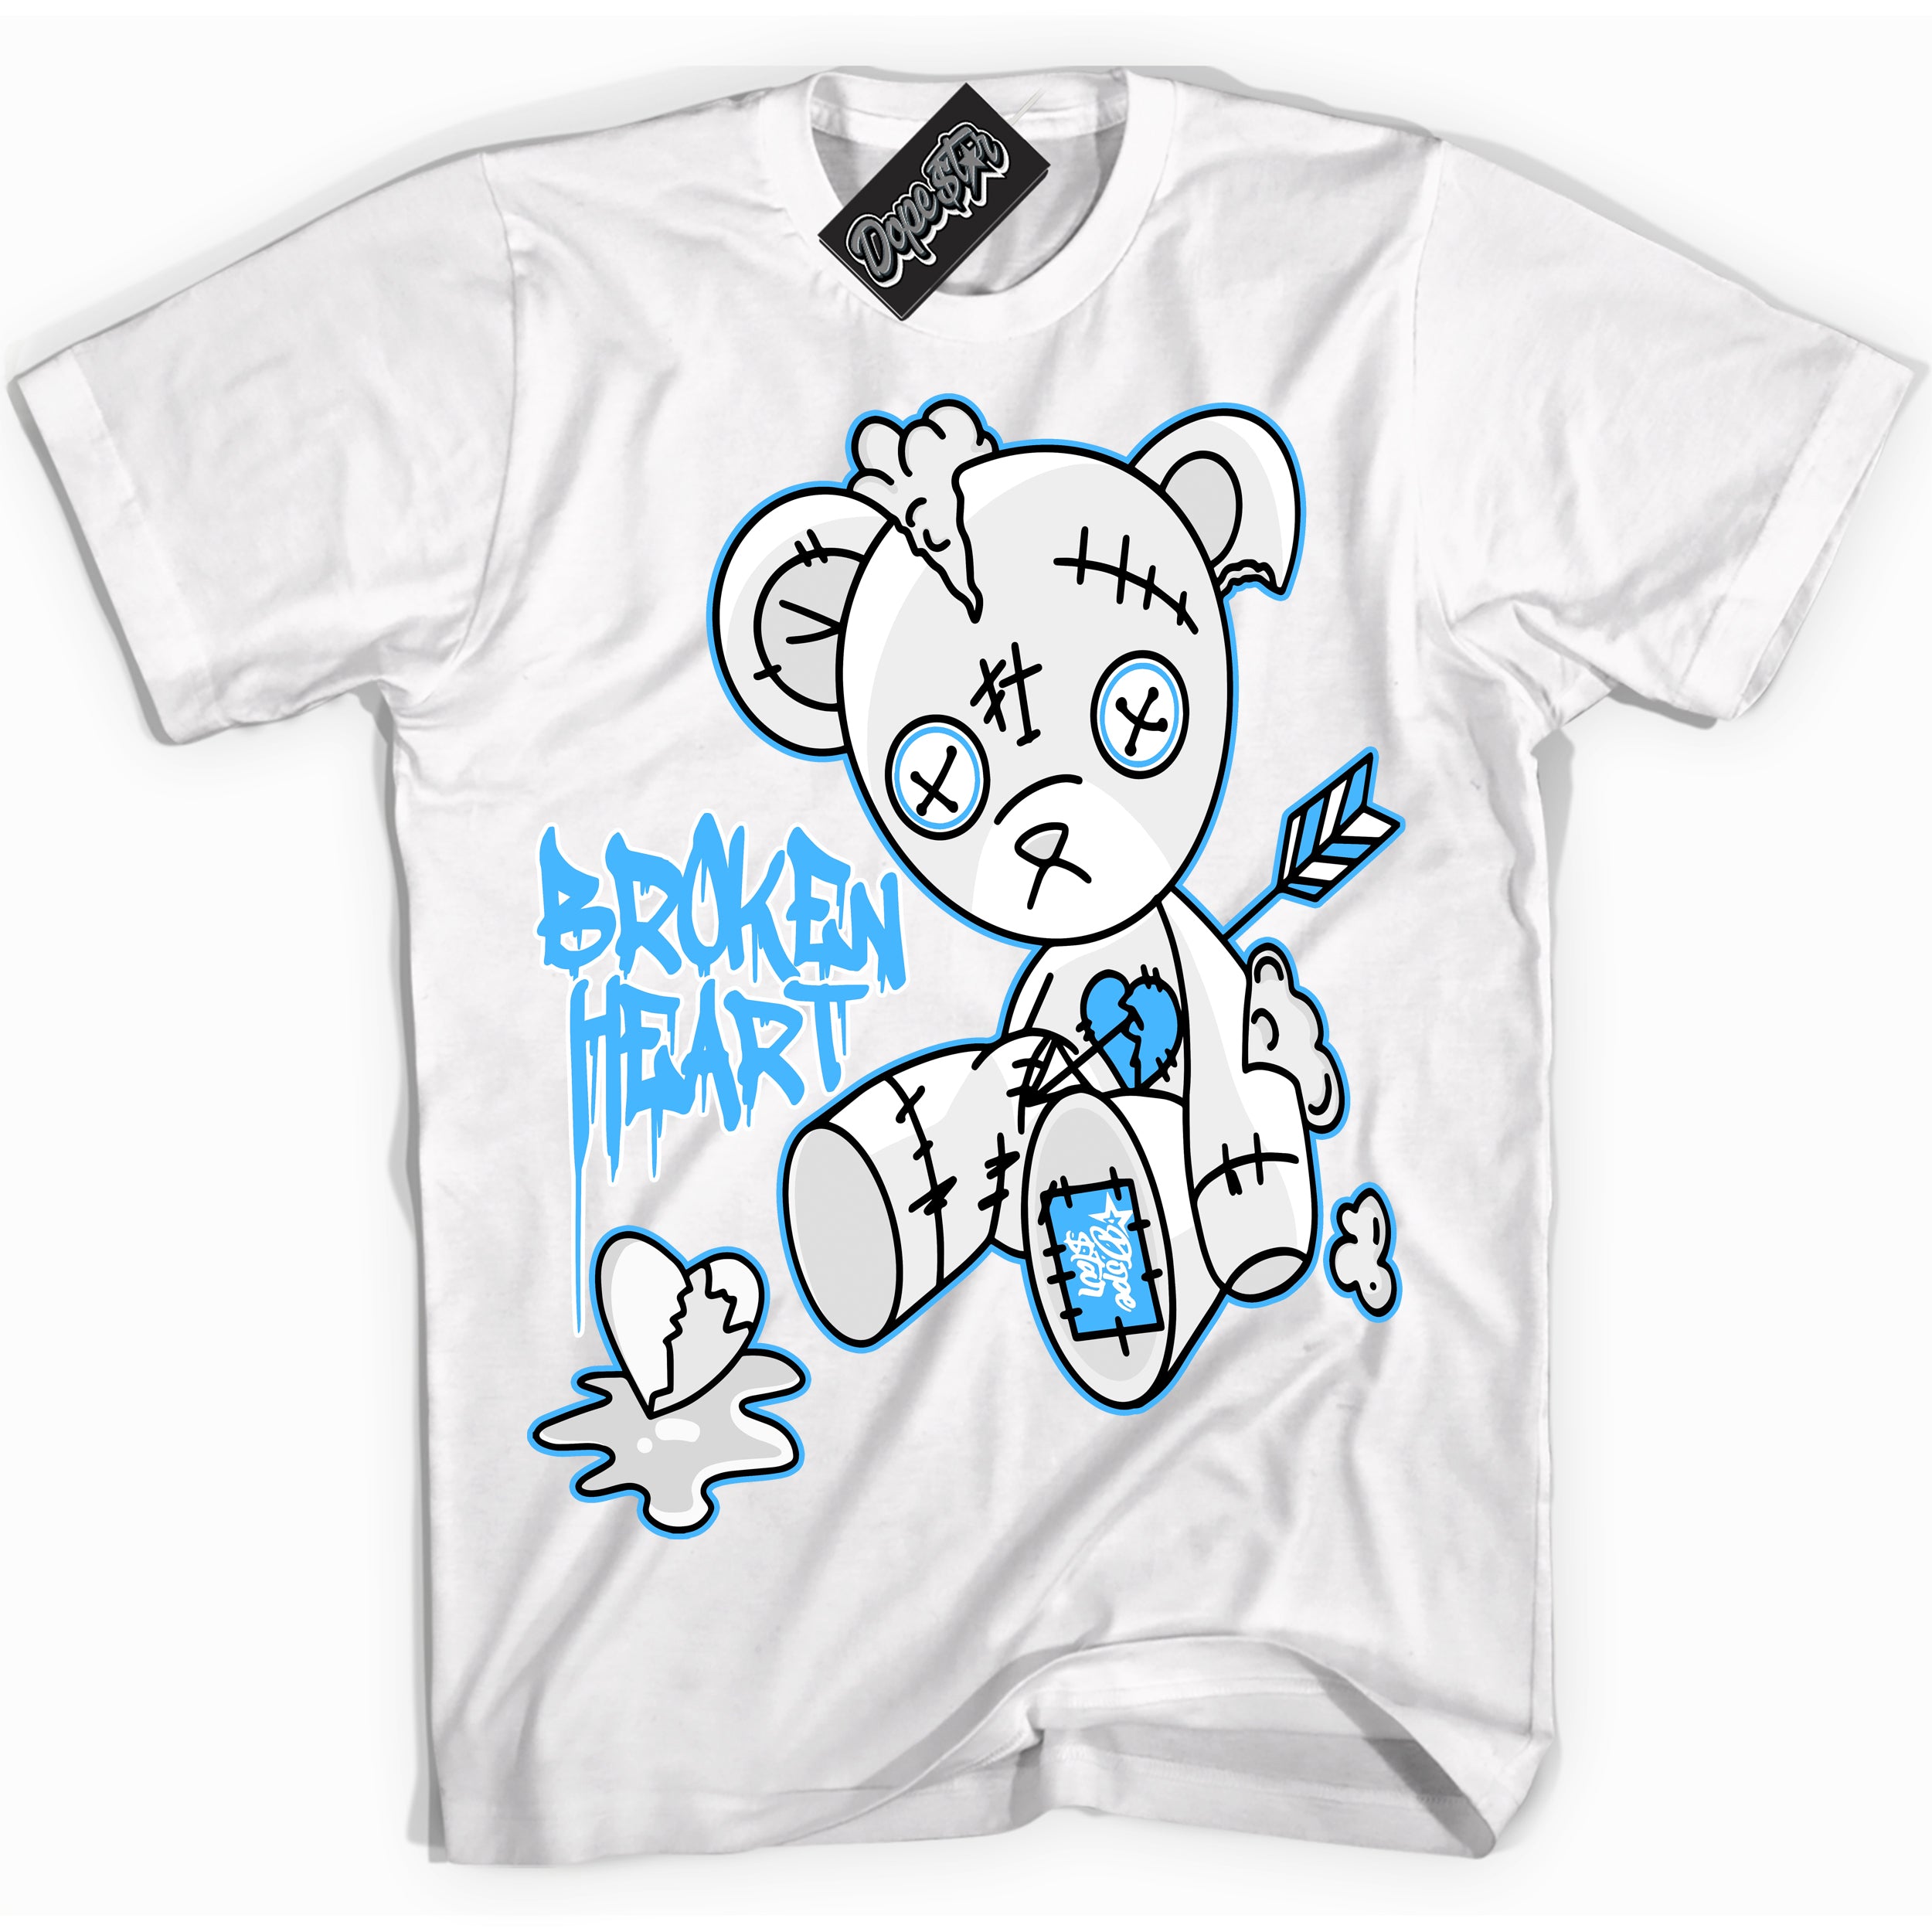 Cool White graphic tee with “ Broken Heart Bear ” design, that perfectly matches Powder Blue 9s sneakers 